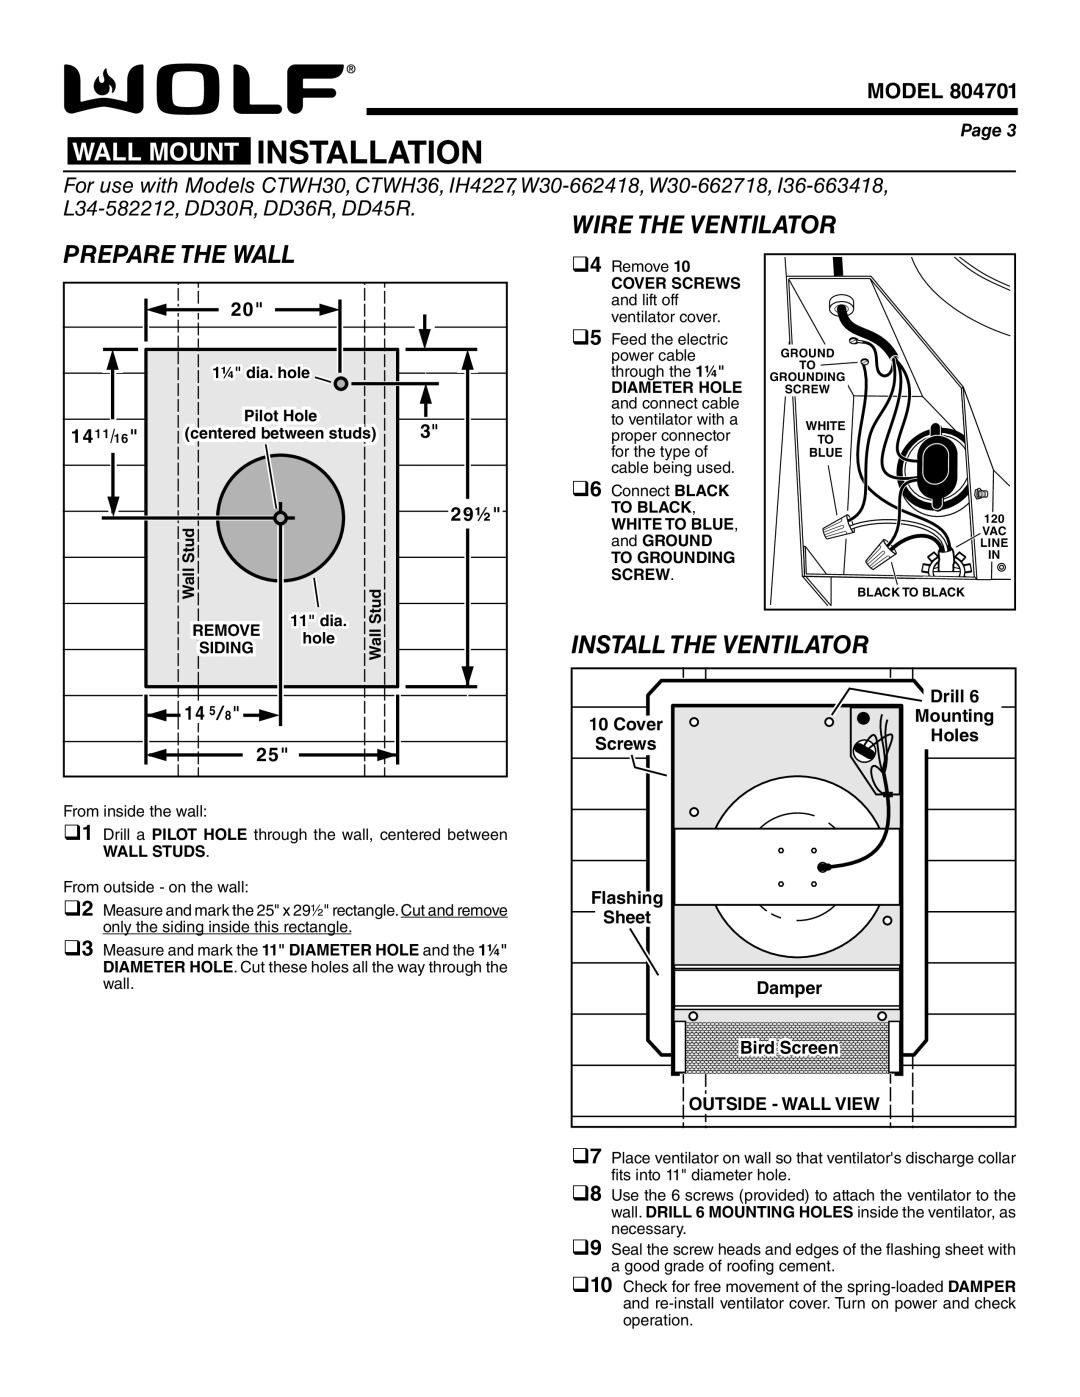 Wolf Appliance Company 801640 14 11, 14 5, Wall Mount Installation, Wire The Ventilator, Prepare The Wall, Model, Page 